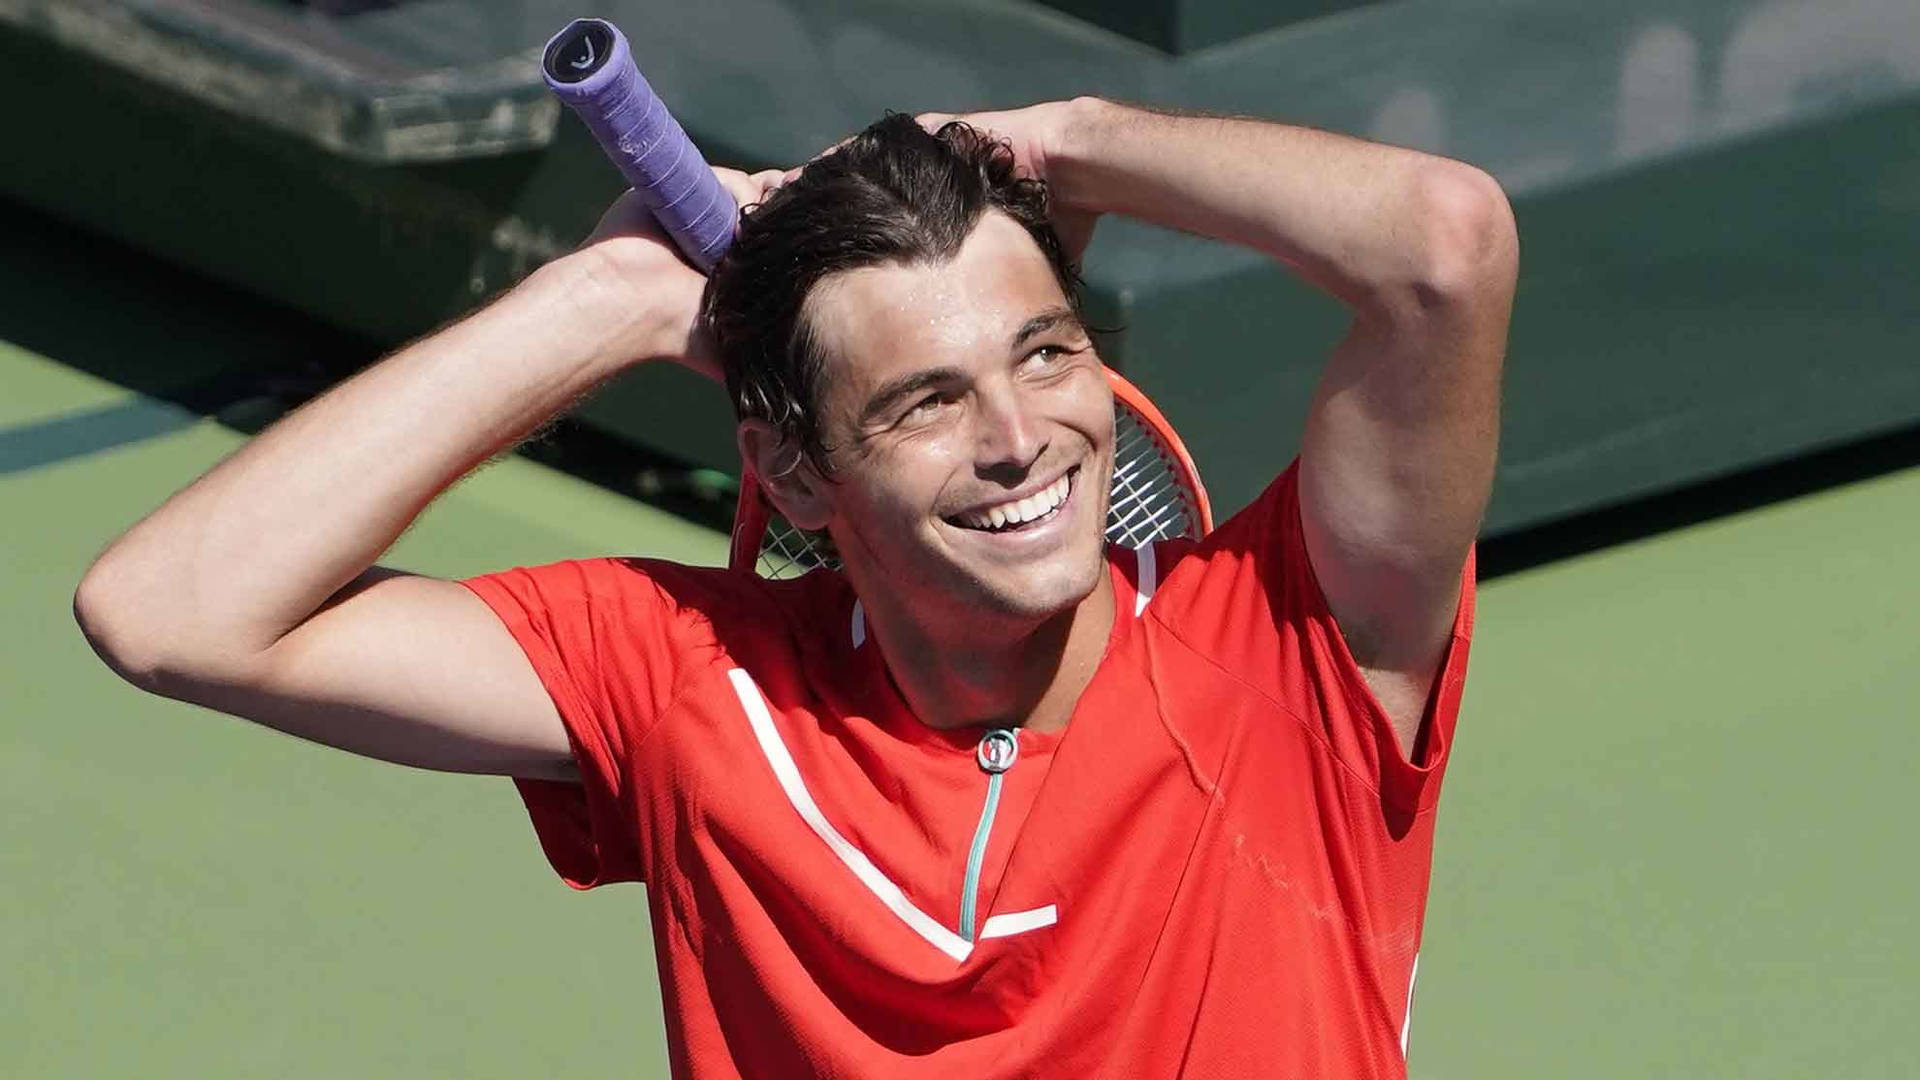 Taylor Fritz In Red Shirt Wallpaper